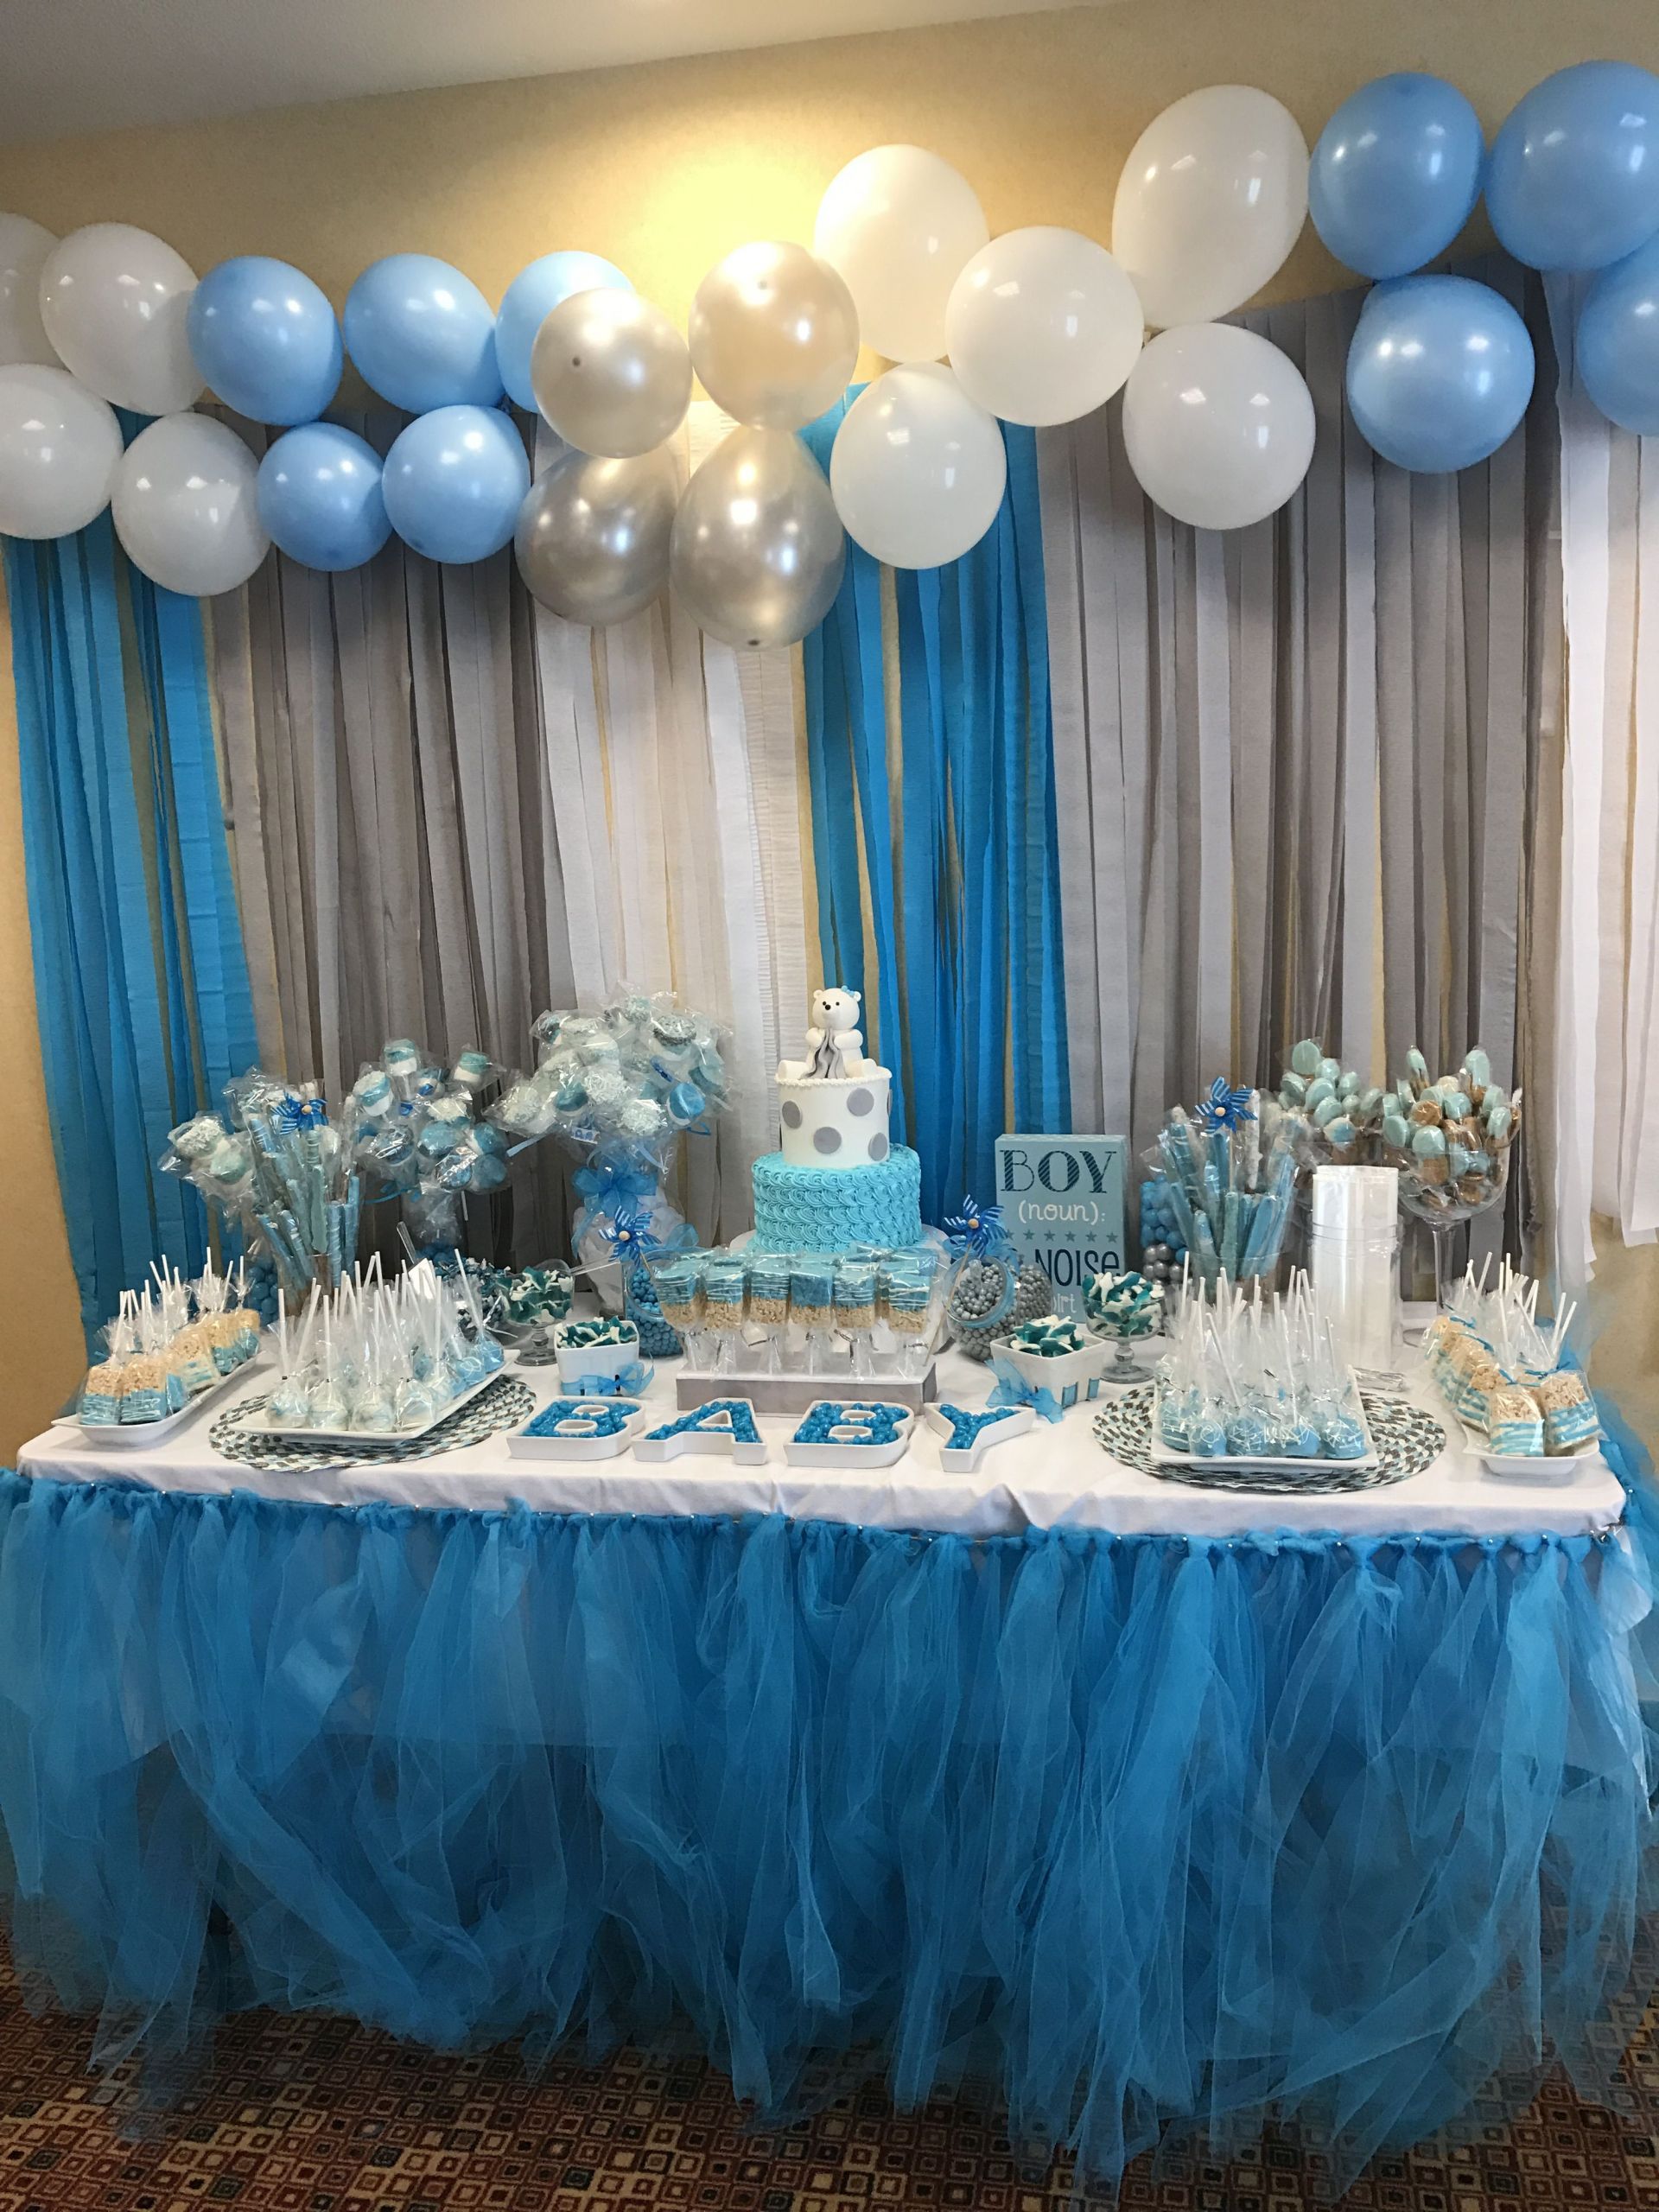 Baby Shower Decorations Ideas For Boy
 Baby Boy Baby Shower